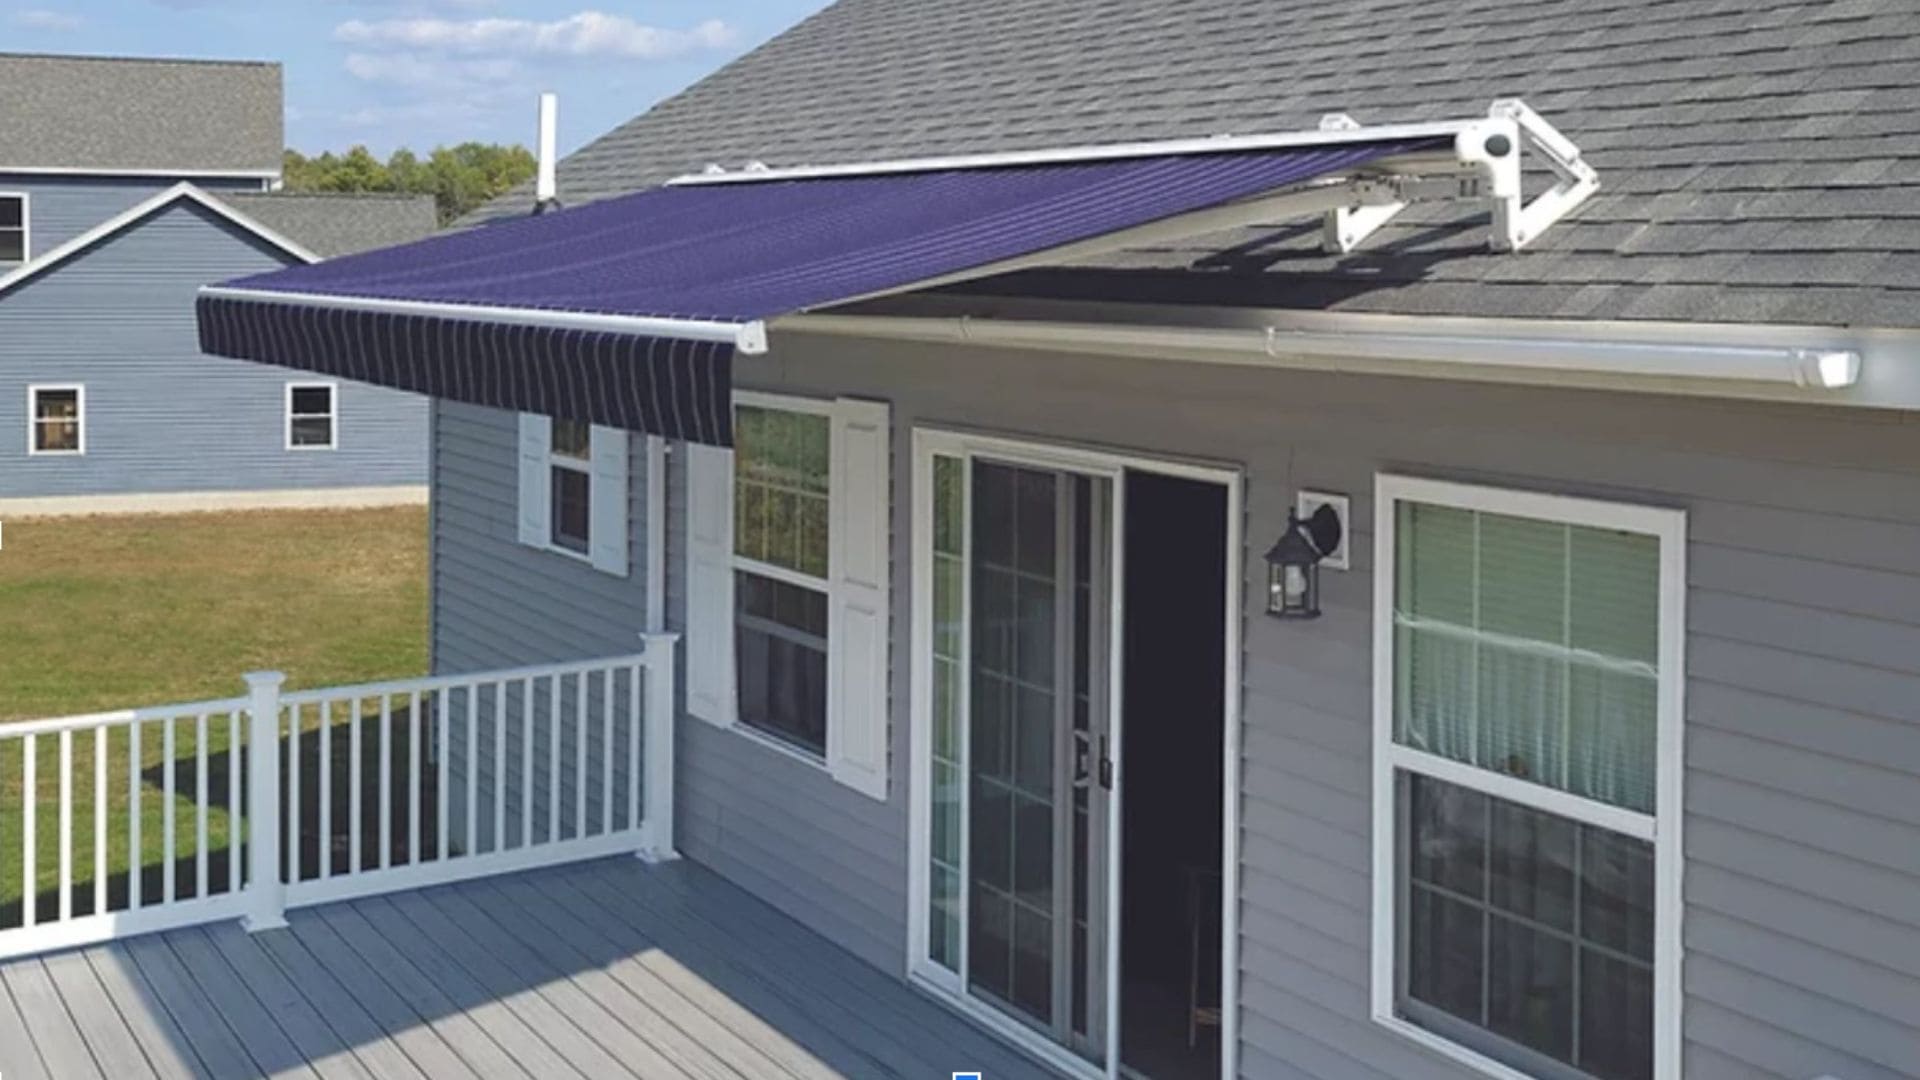 How Much Clearance is Needed for a Retractable Awning?